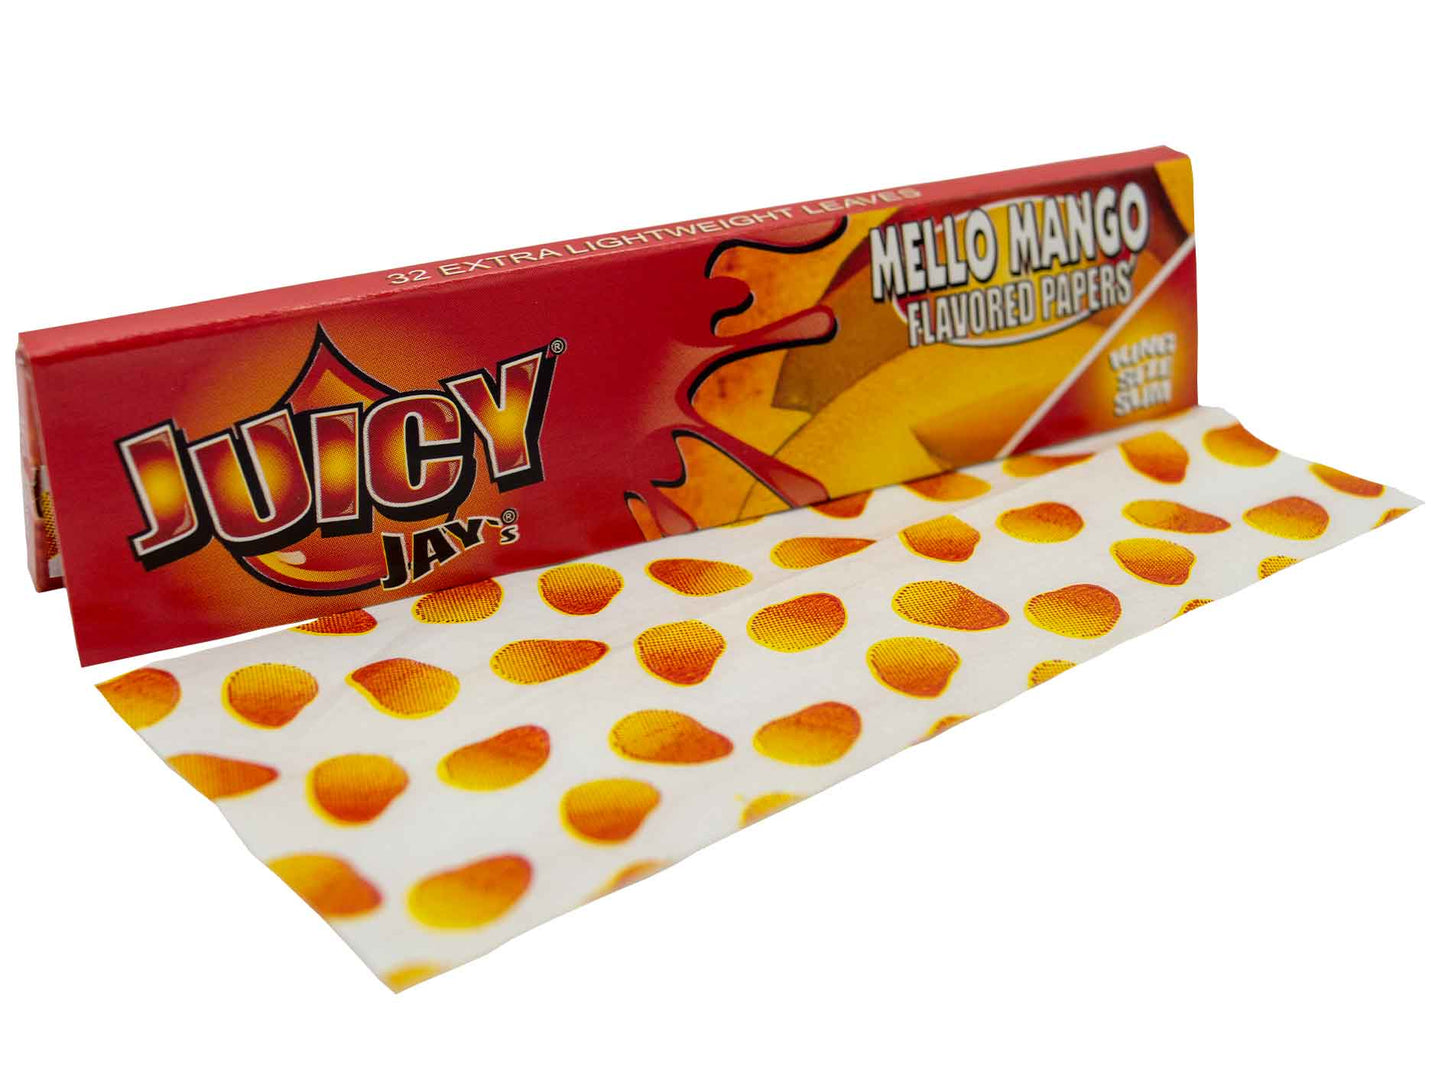 Juicy Jay's - King Size Papers, Mellow Mango